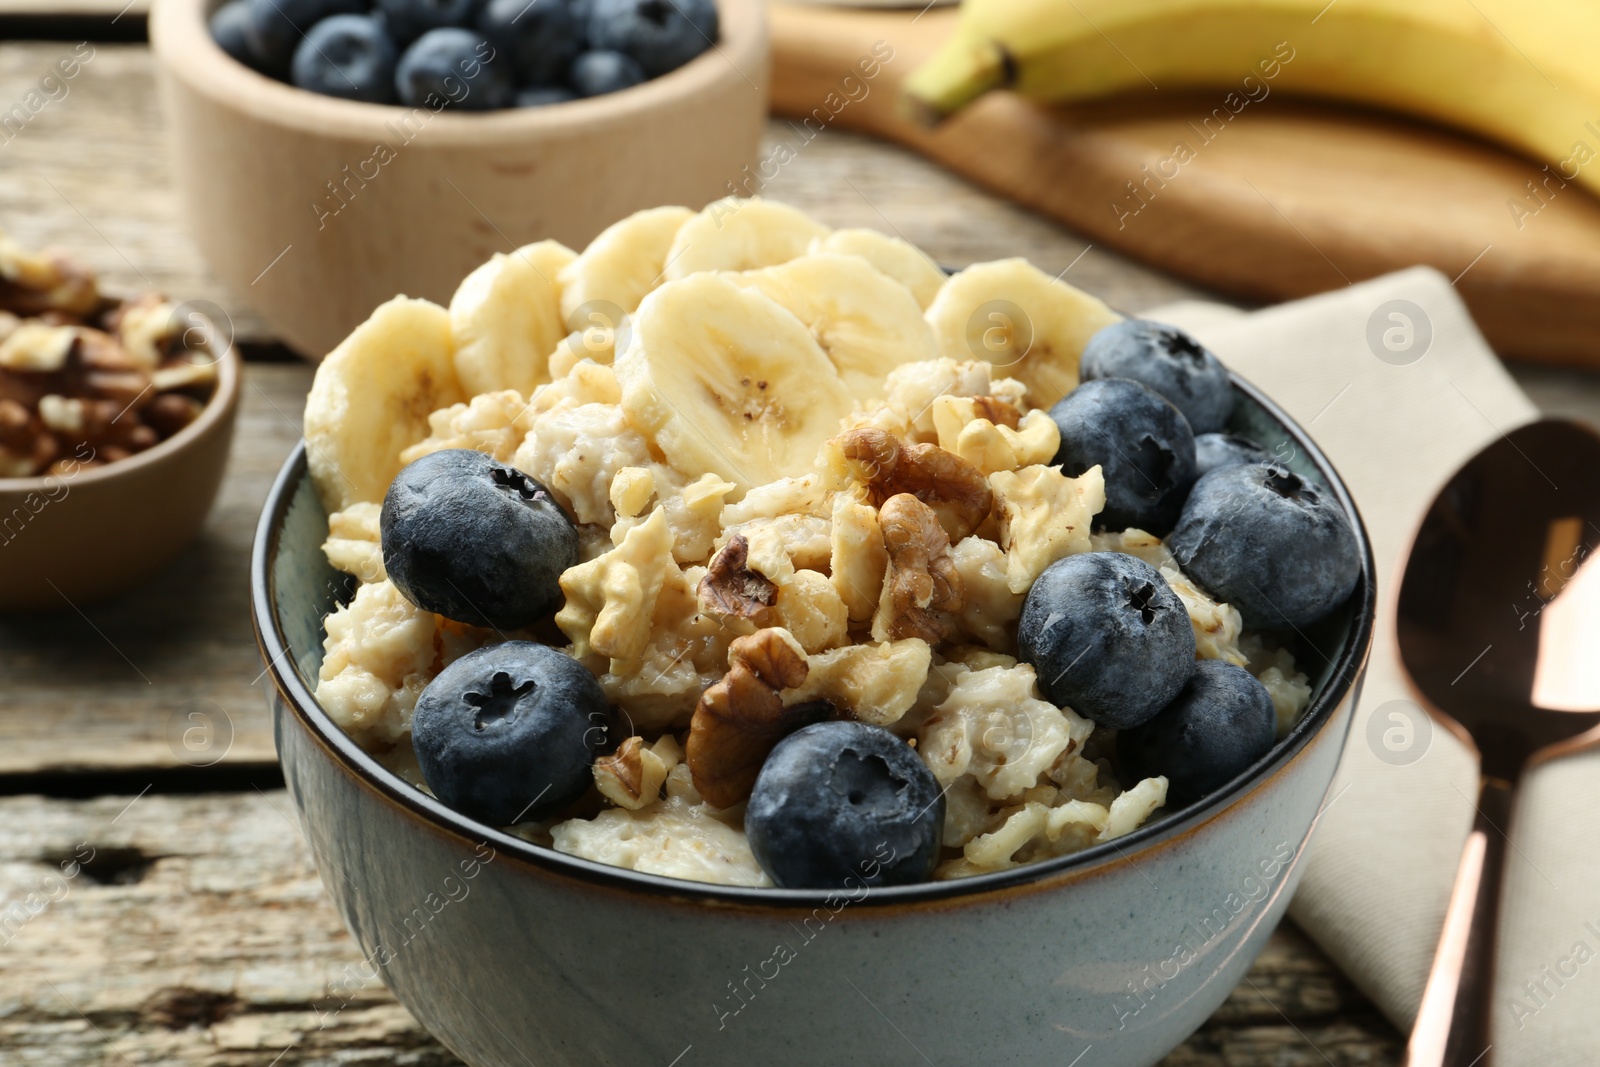 Photo of Tasty oatmeal with banana, blueberries and walnuts served in bowl on wooden table, closeup